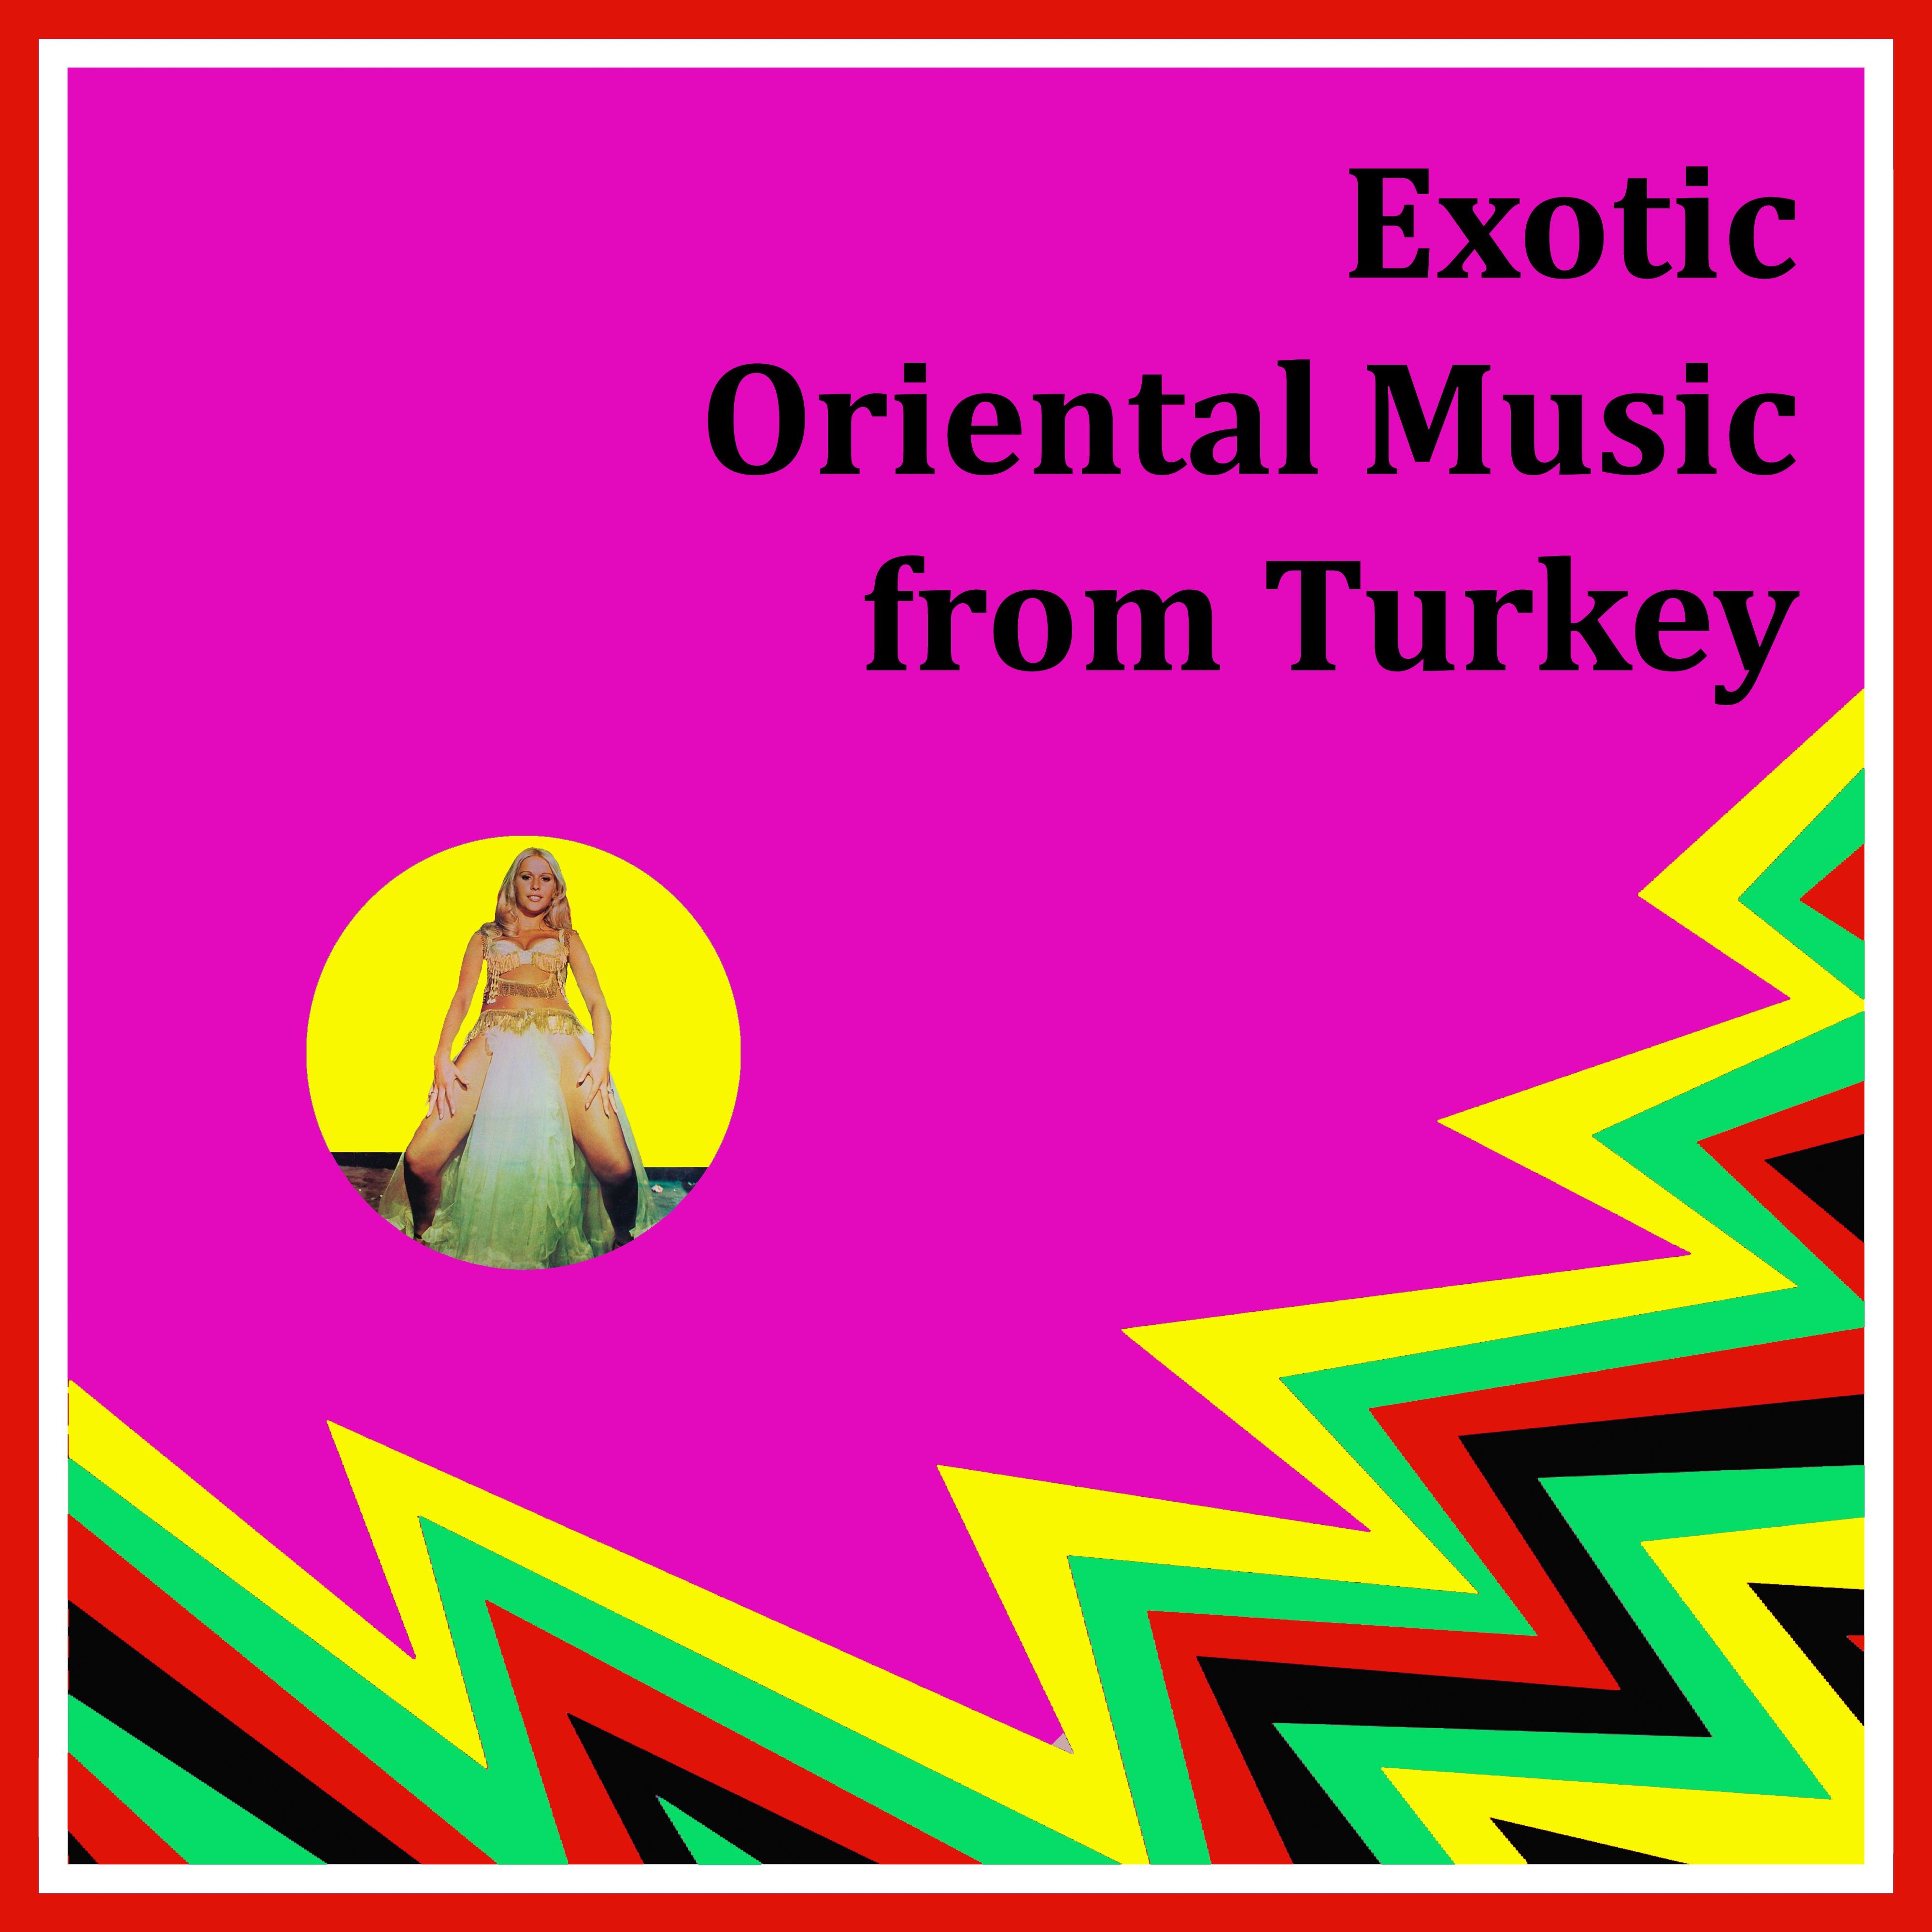 Exotic Oriental Music from Turkey